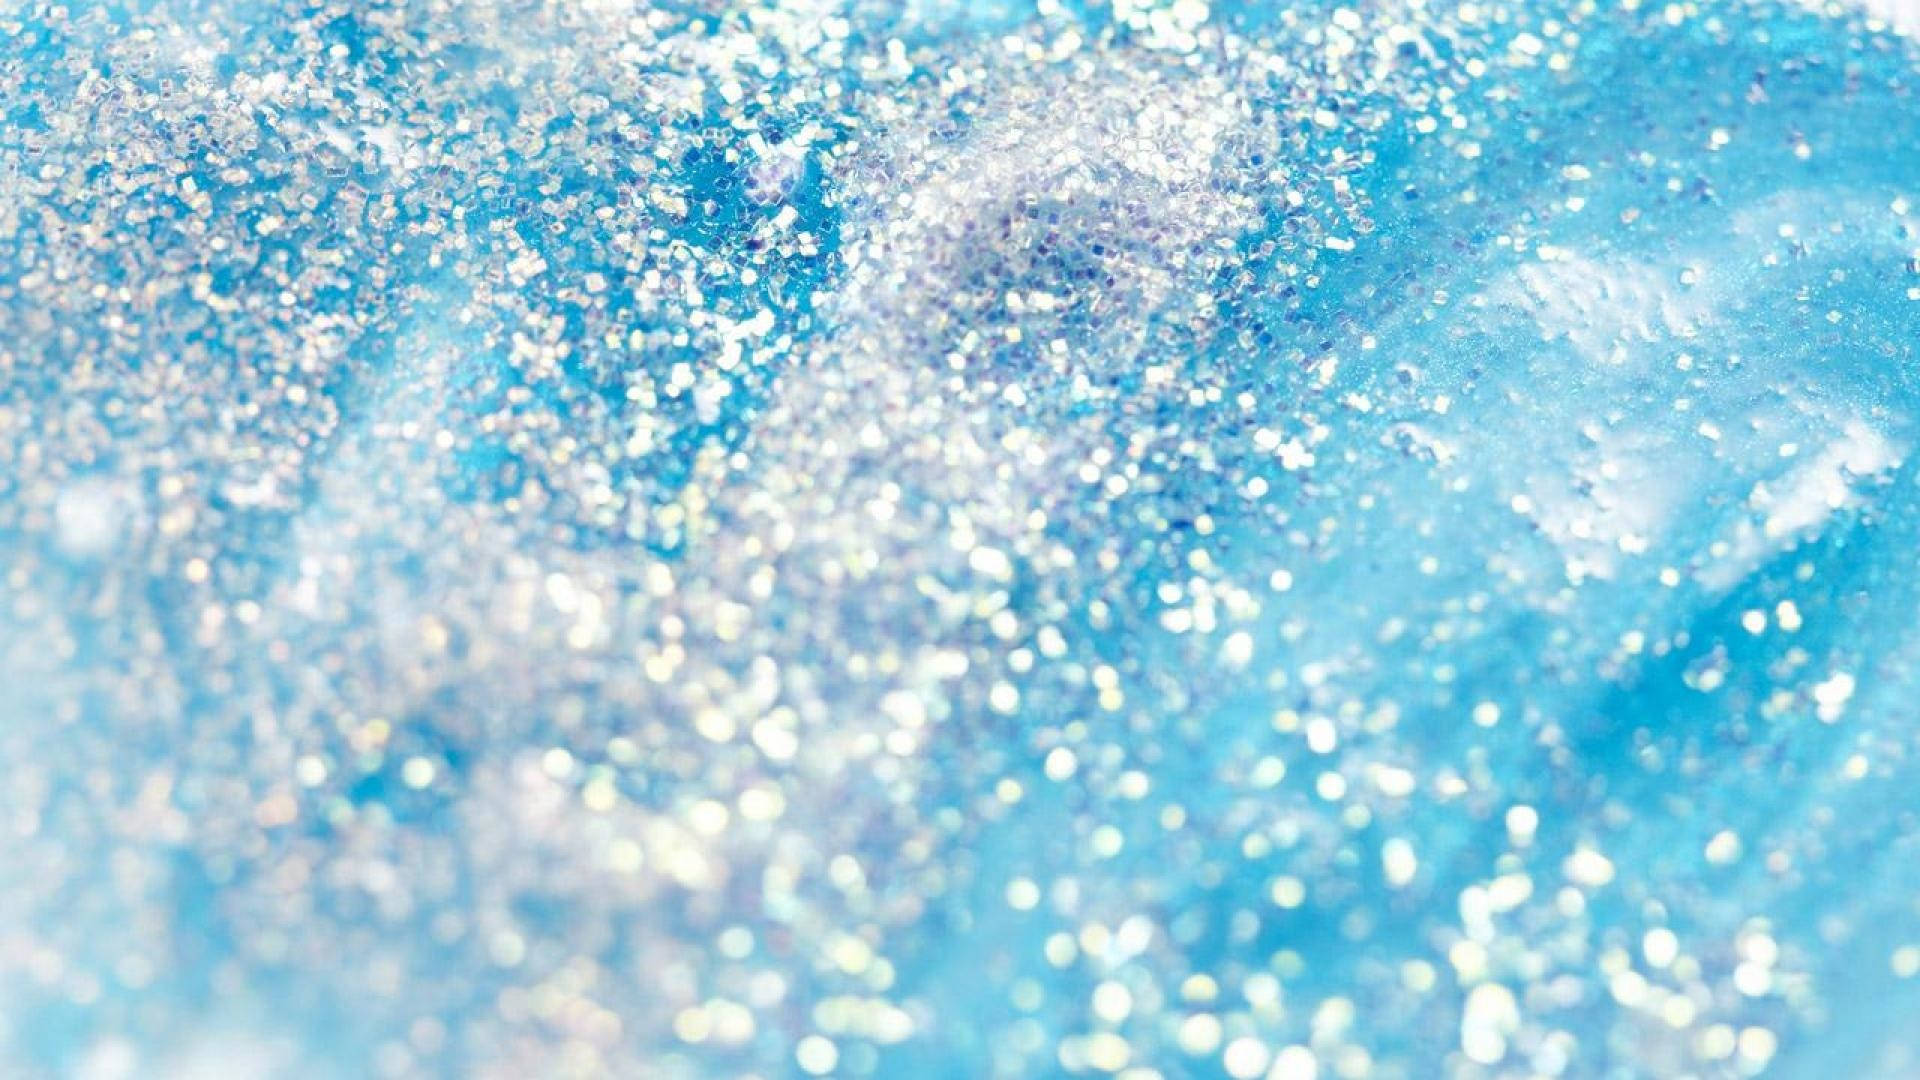 Abstract White And Blue Glitter Wallpaper